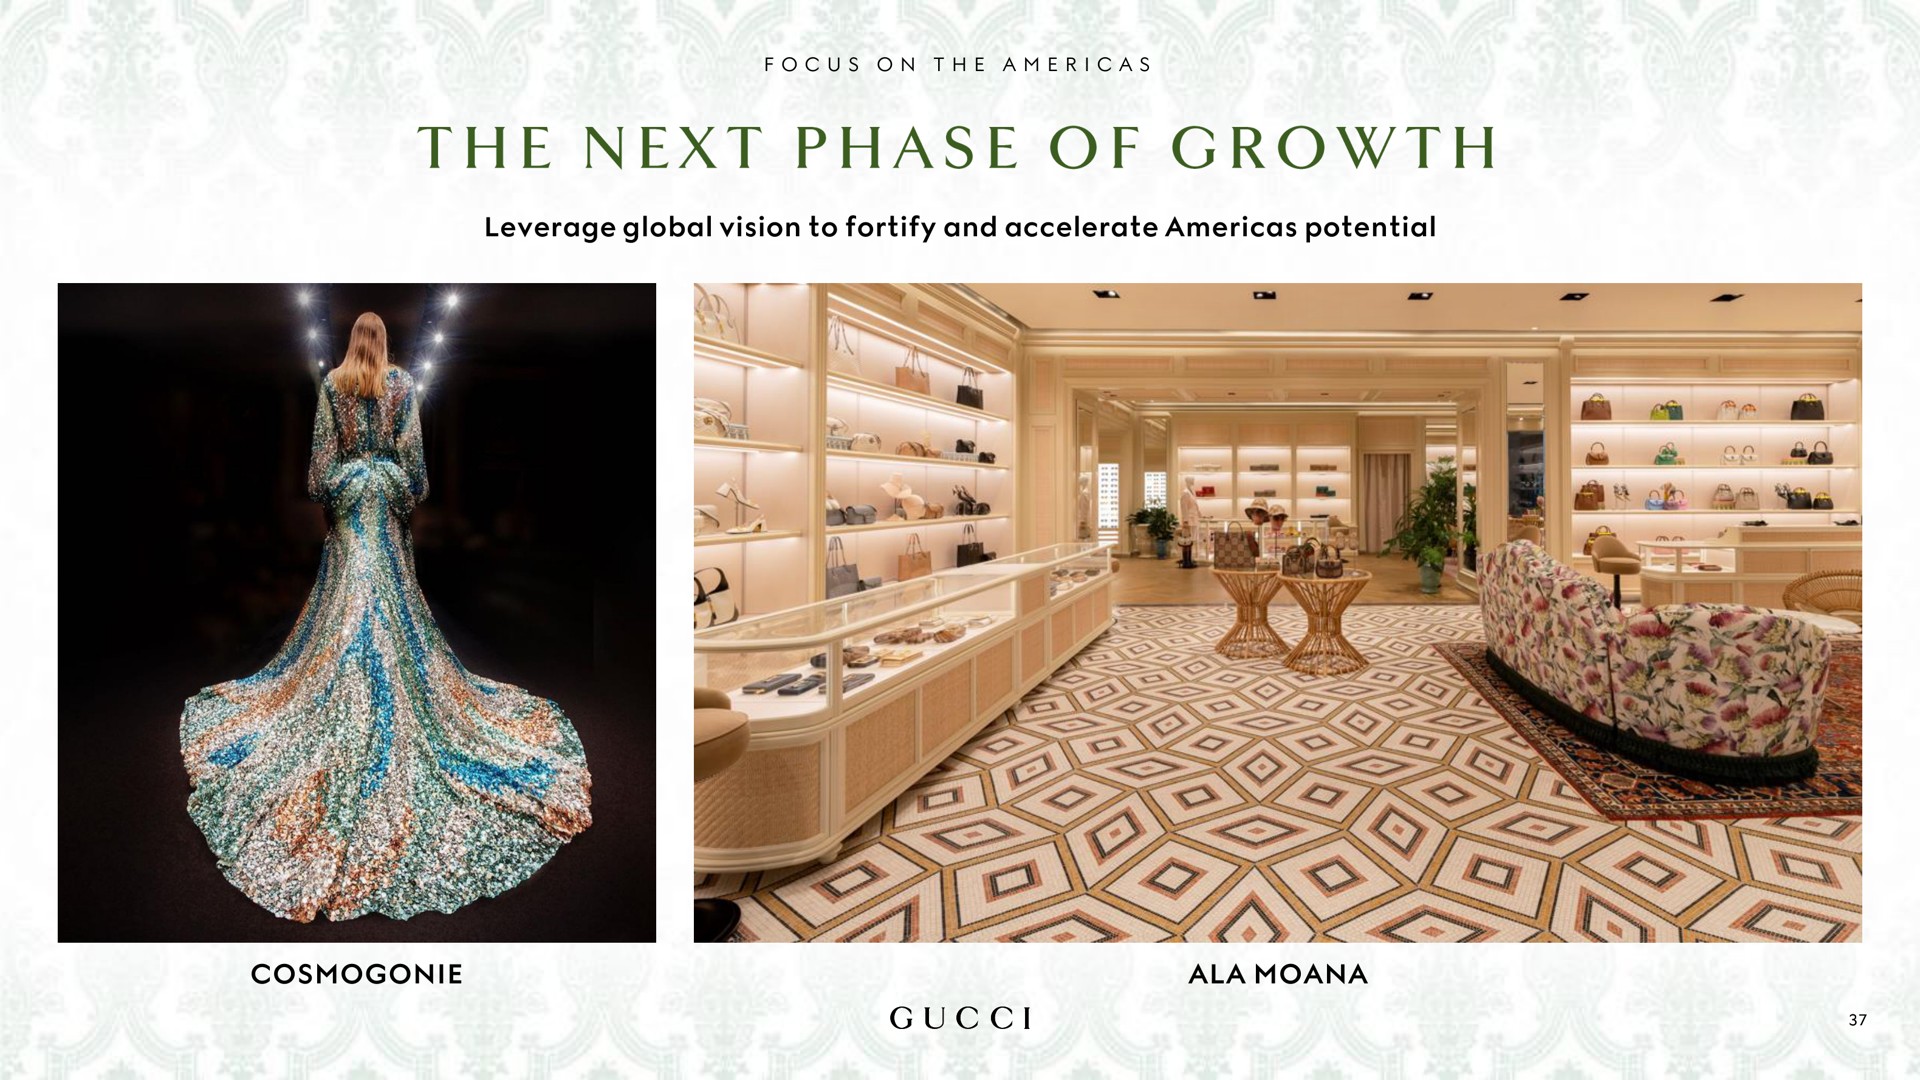 a i a leverage global vision to fortify and accelerate potential ala the next phase of growth | Kering